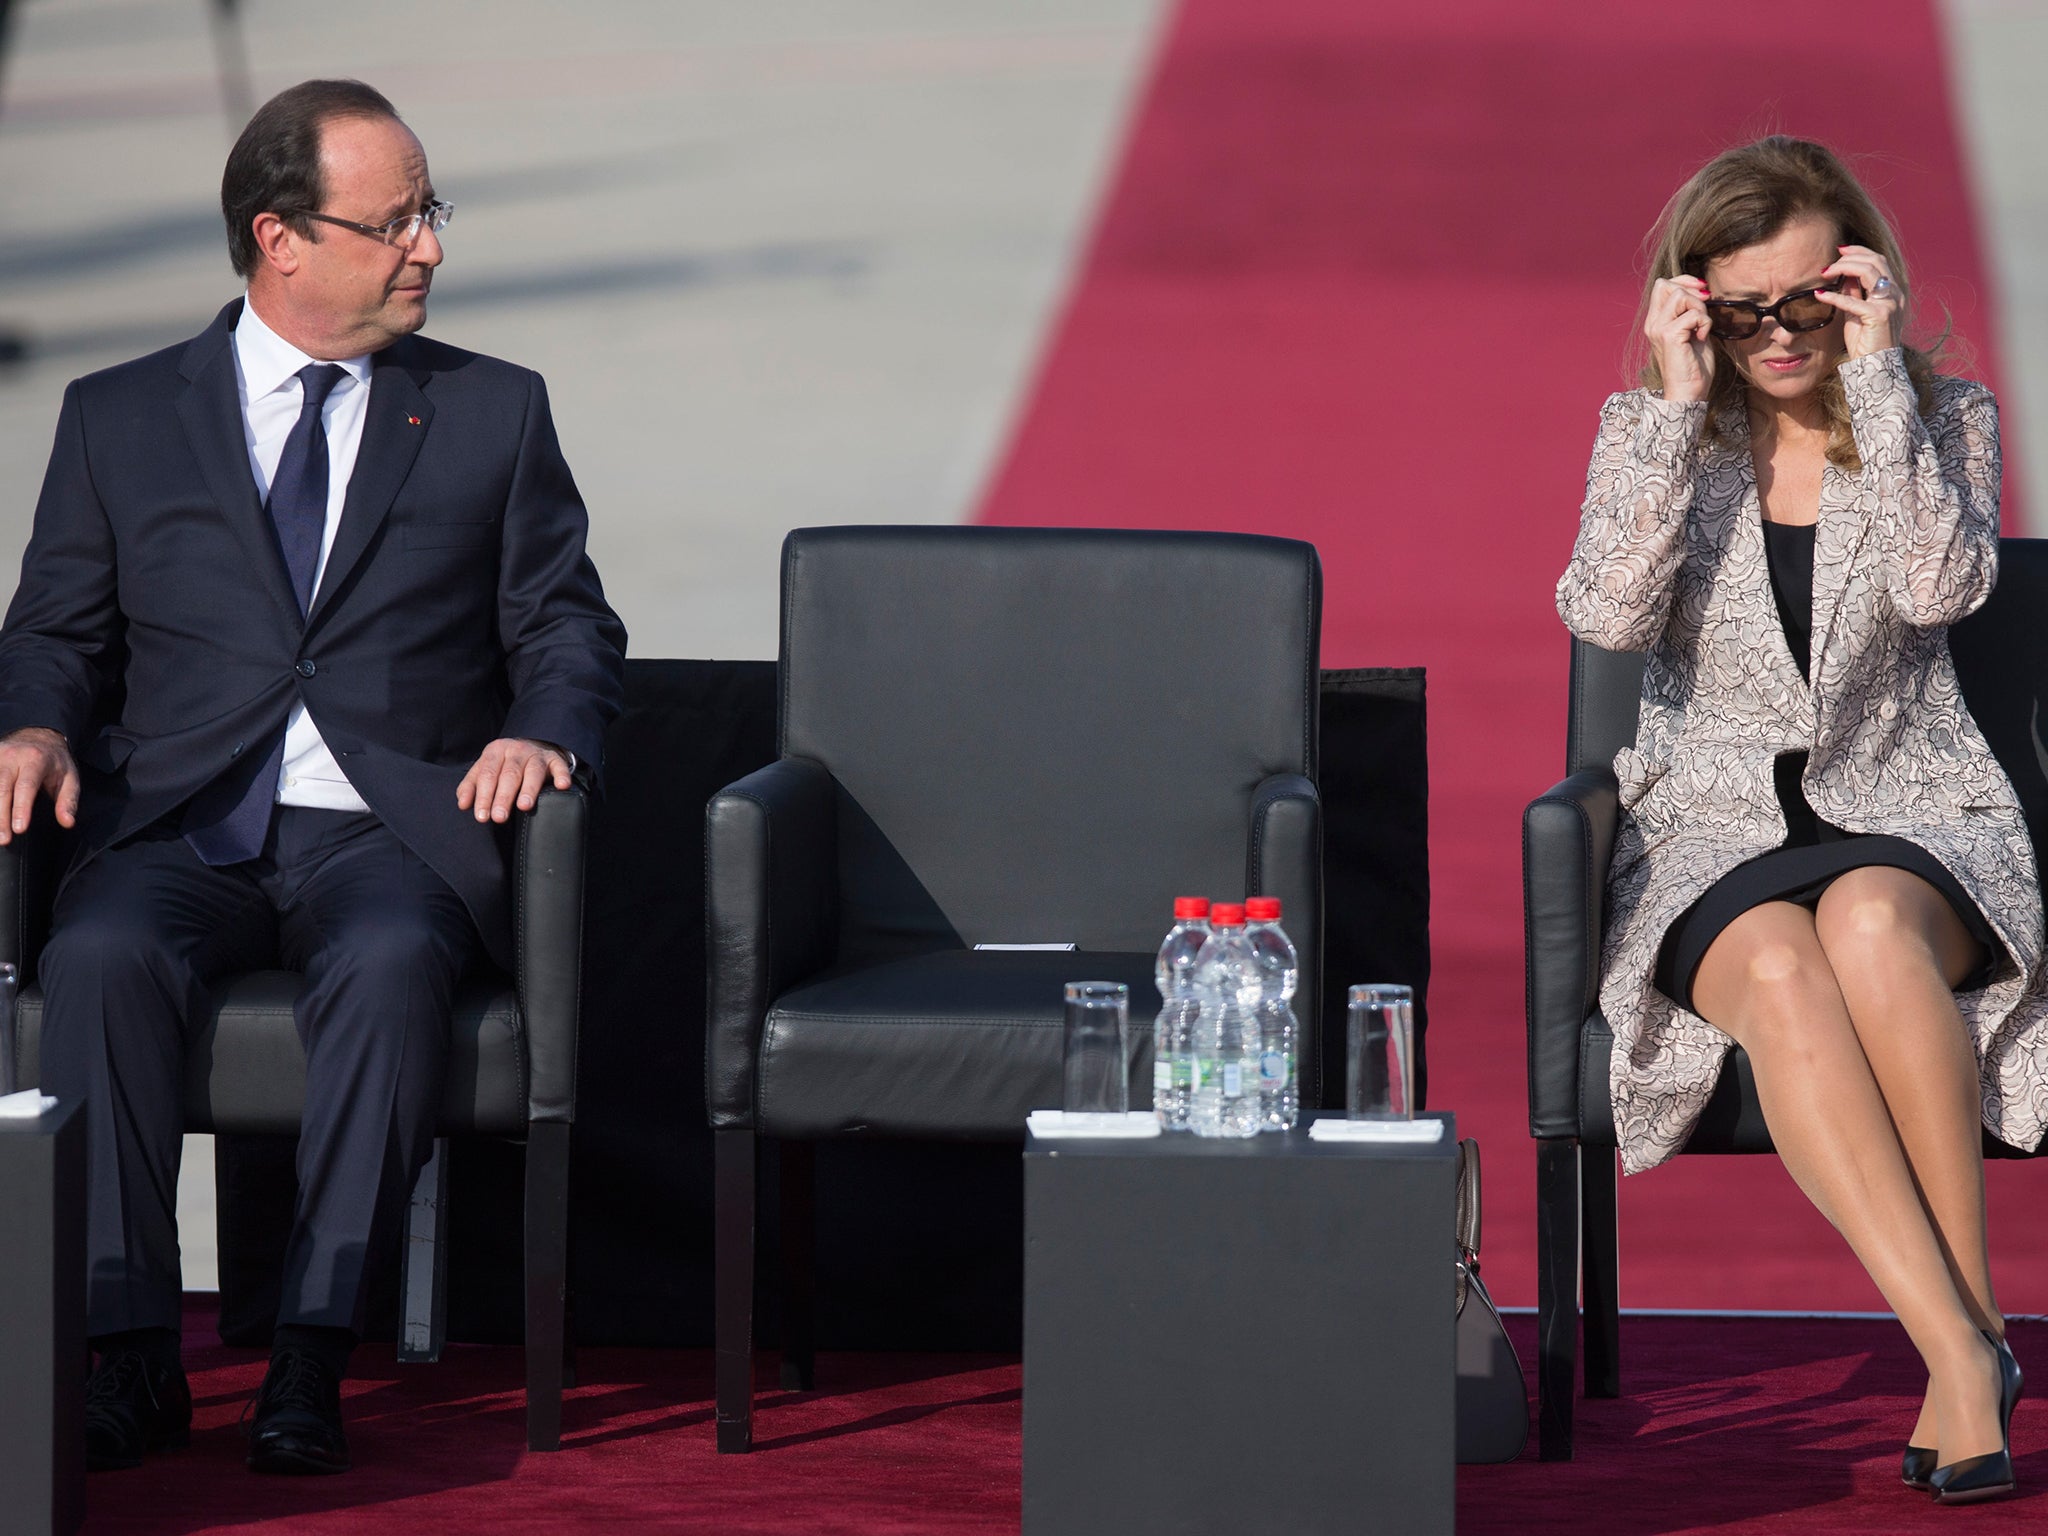 Valerie Trierweiler's autobiography tells the story of her seven-year relationship with Francois Hollande, whom she never married (Getty)